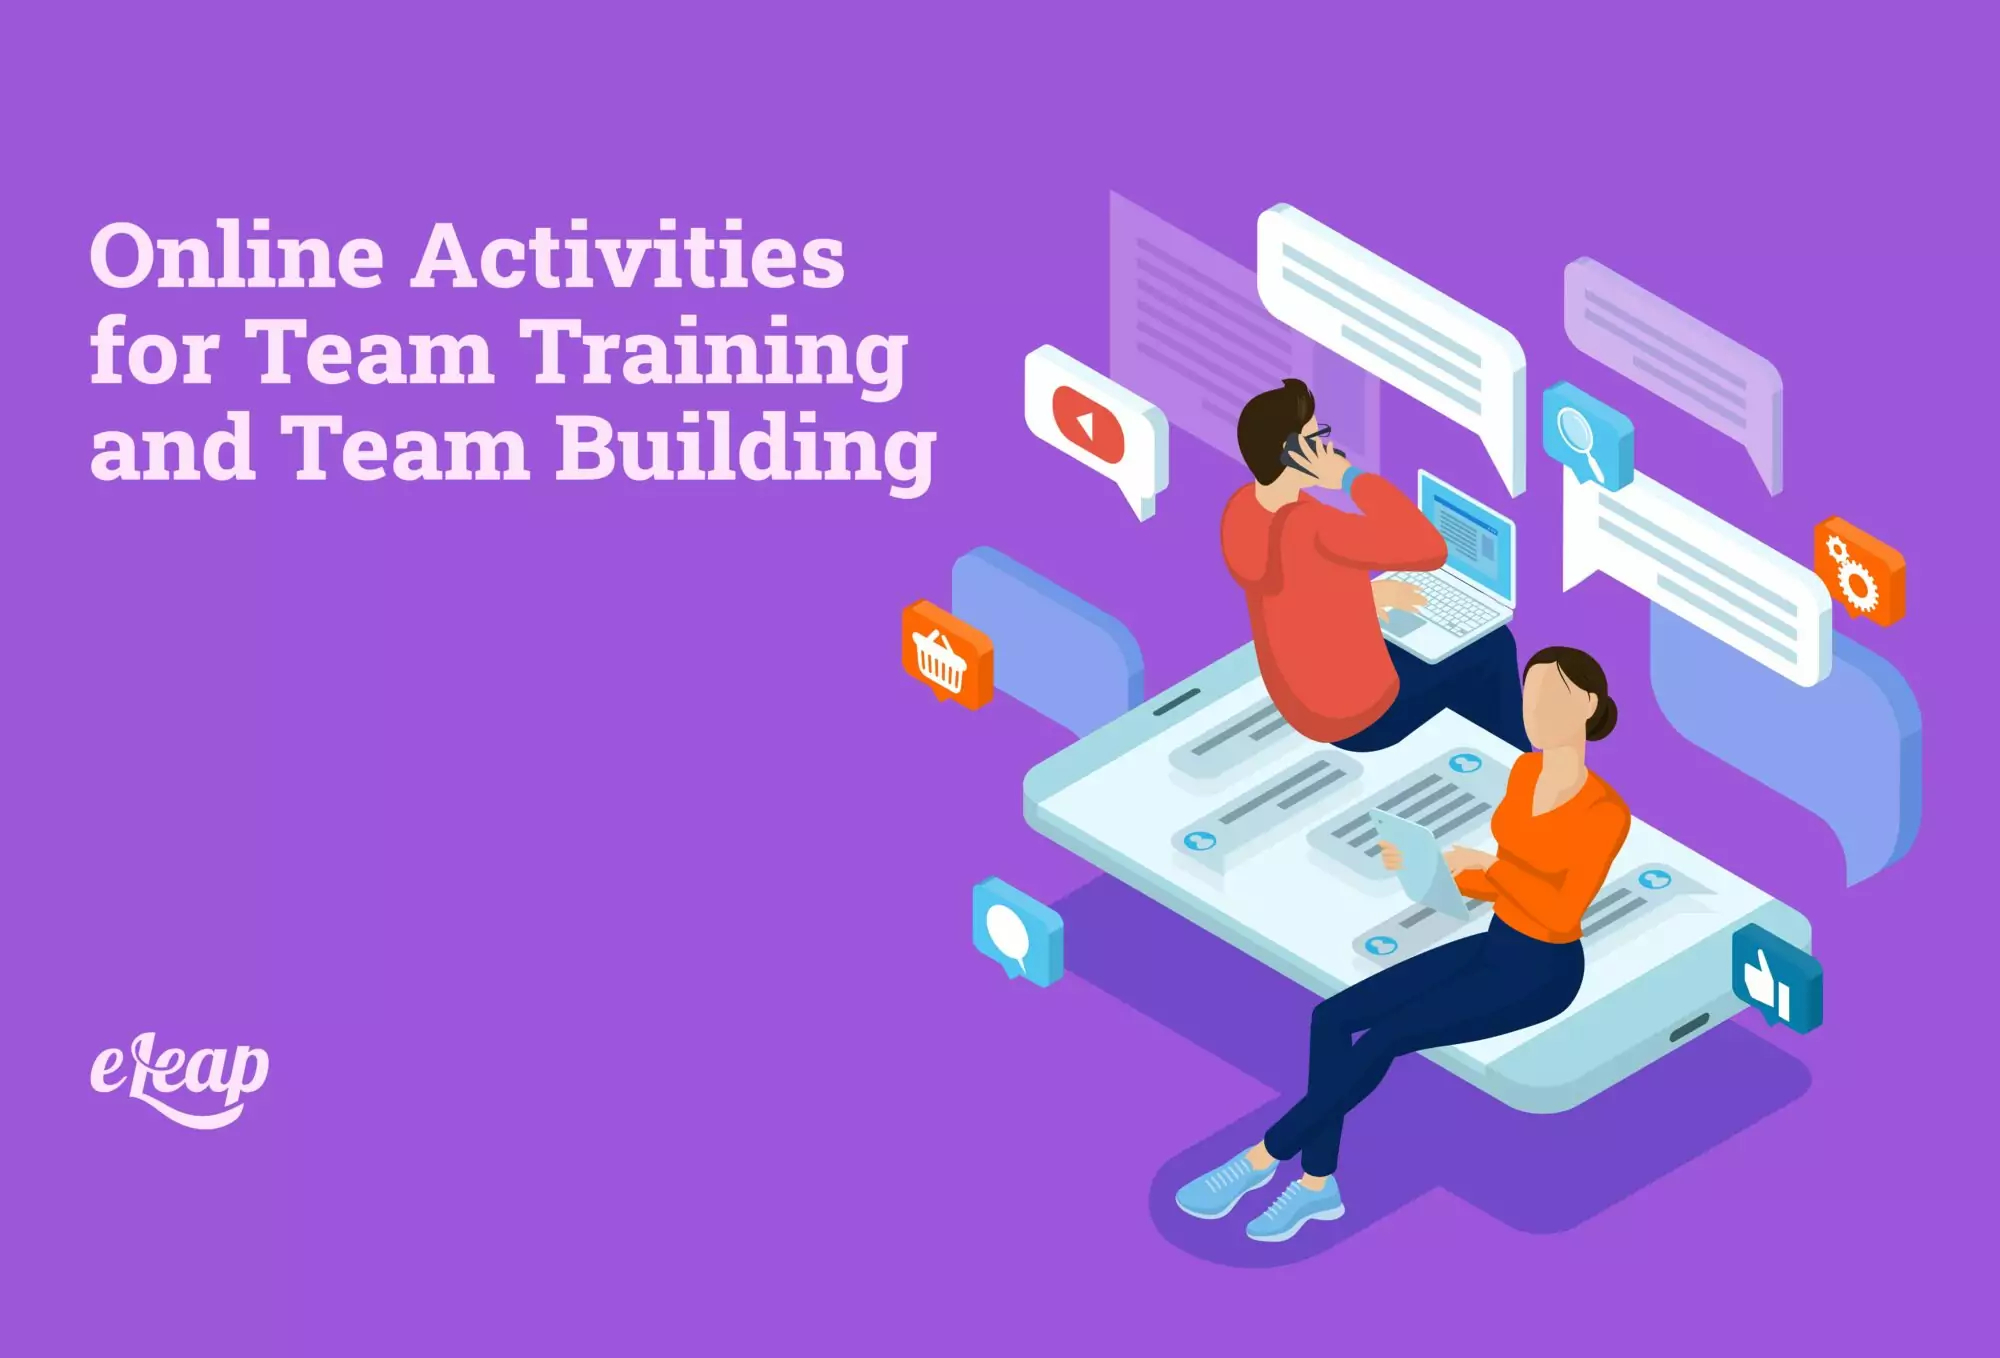 Online Activities for Team Training and Team Building